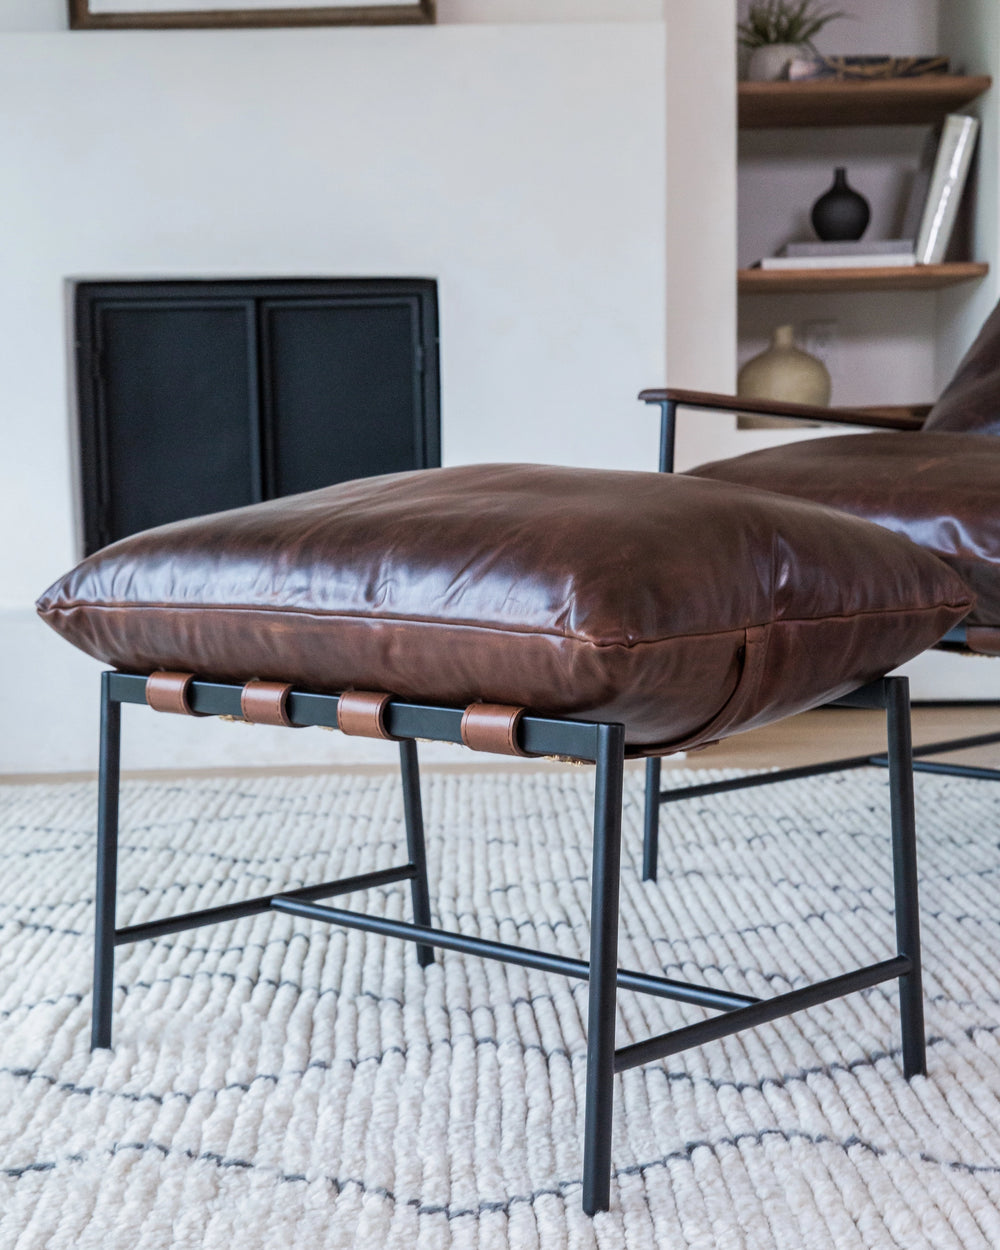 Close-up view of a Vail Ottoman in a cozy living room, with a plush brown leather cushion on a sleek black metal frame. The cushion’s craftsmanship is evident in the detailed stitching and piping, and it is supported by a series of cylindrical wood accents between the frame's legs. 